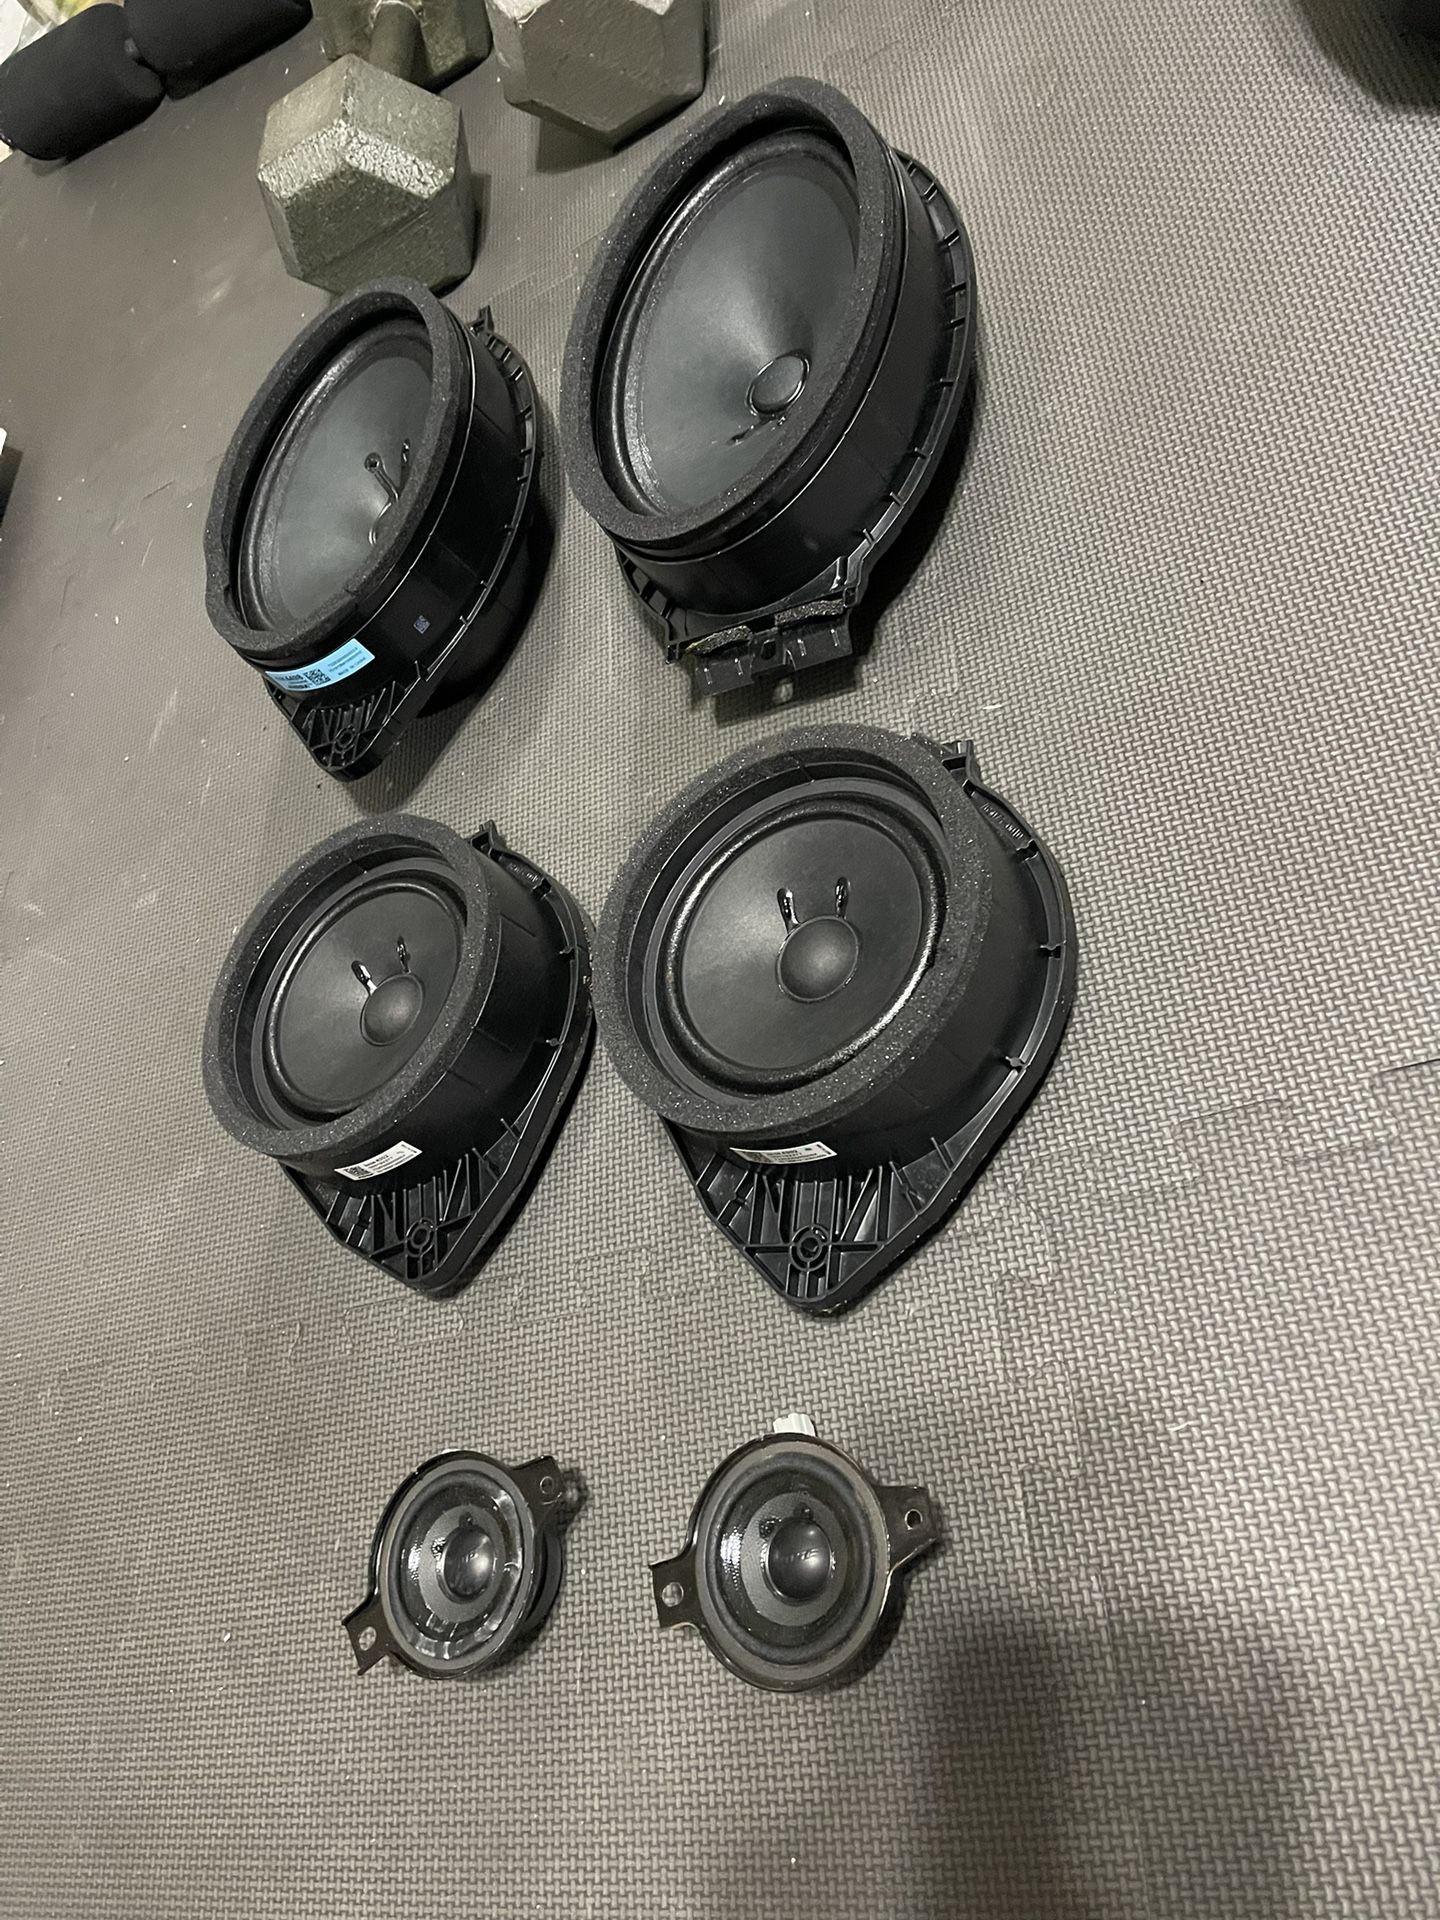 BOSE Speakers GM & CHEVY